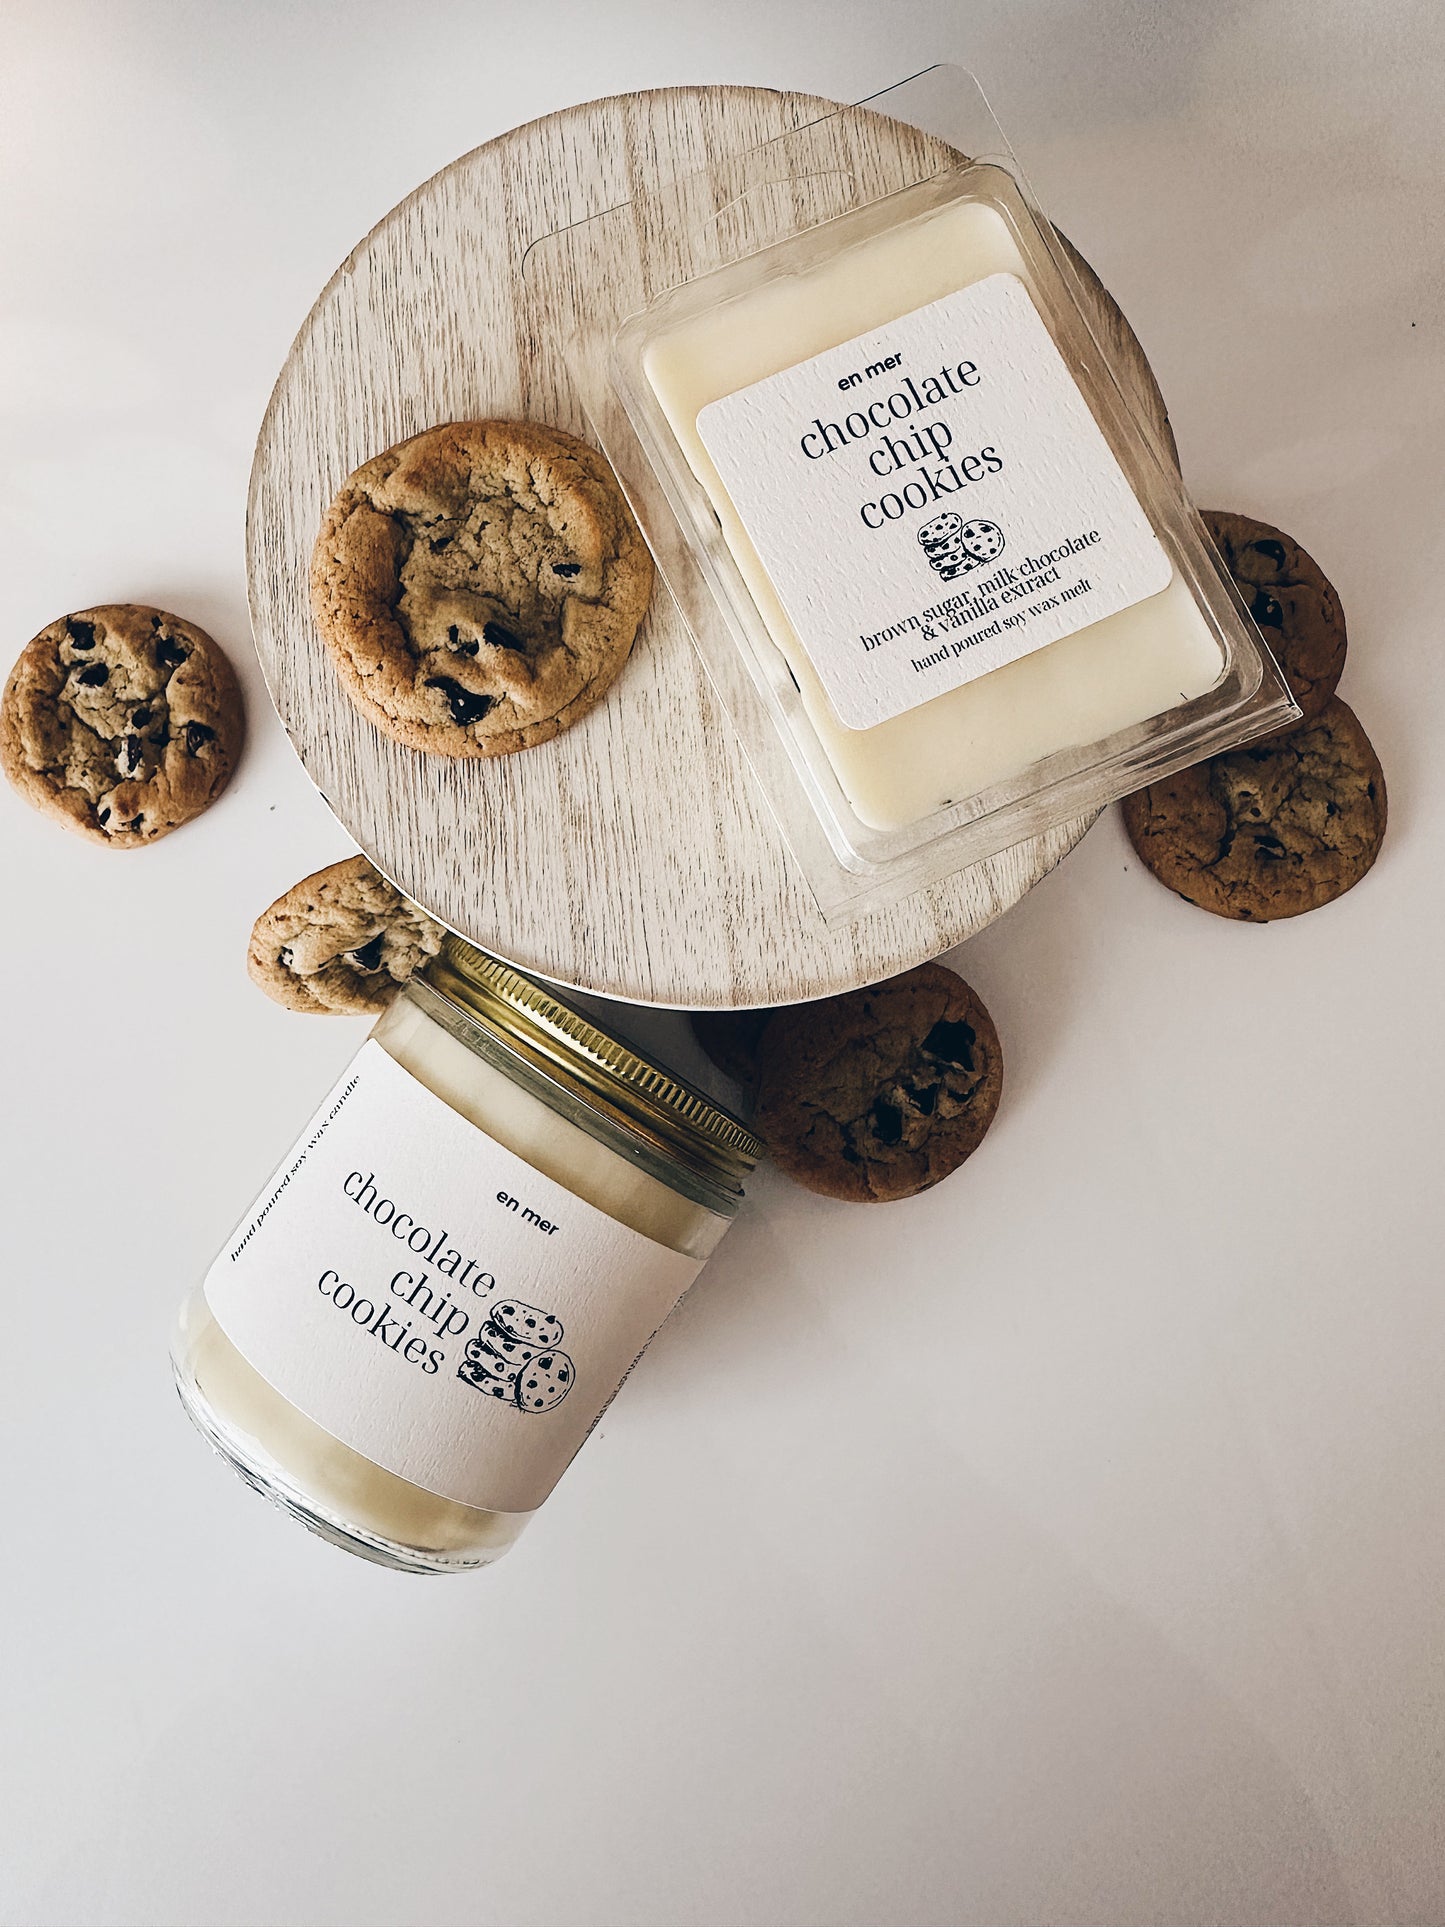 en mer | chocolate chip cookies | soy wax candle & melts